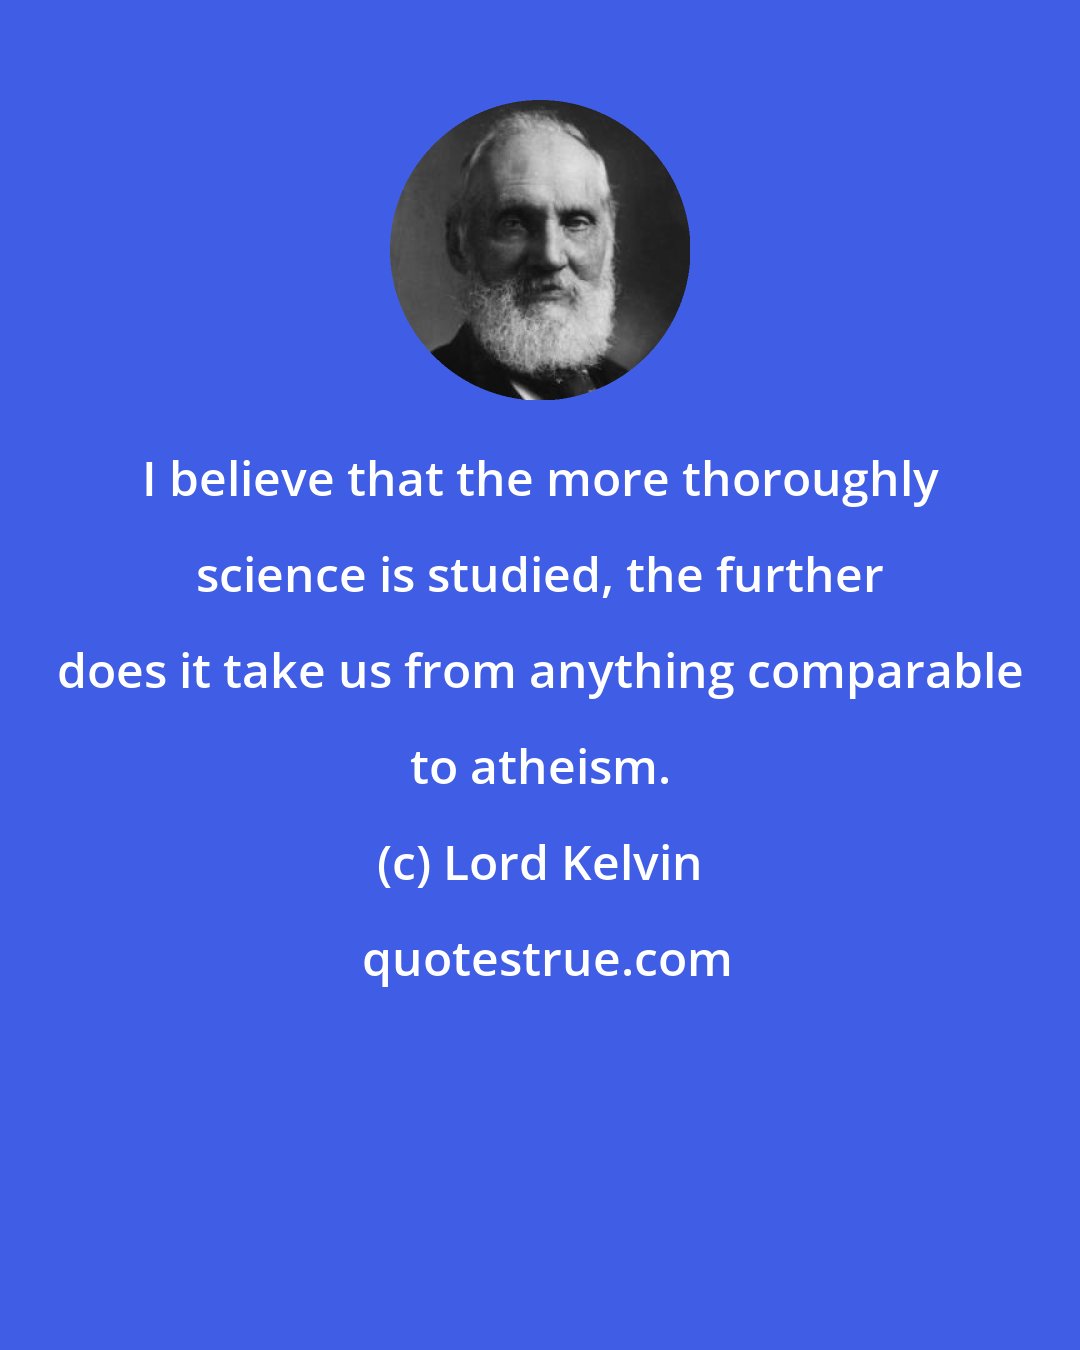 Lord Kelvin: I believe that the more thoroughly science is studied, the further does it take us from anything comparable to atheism.